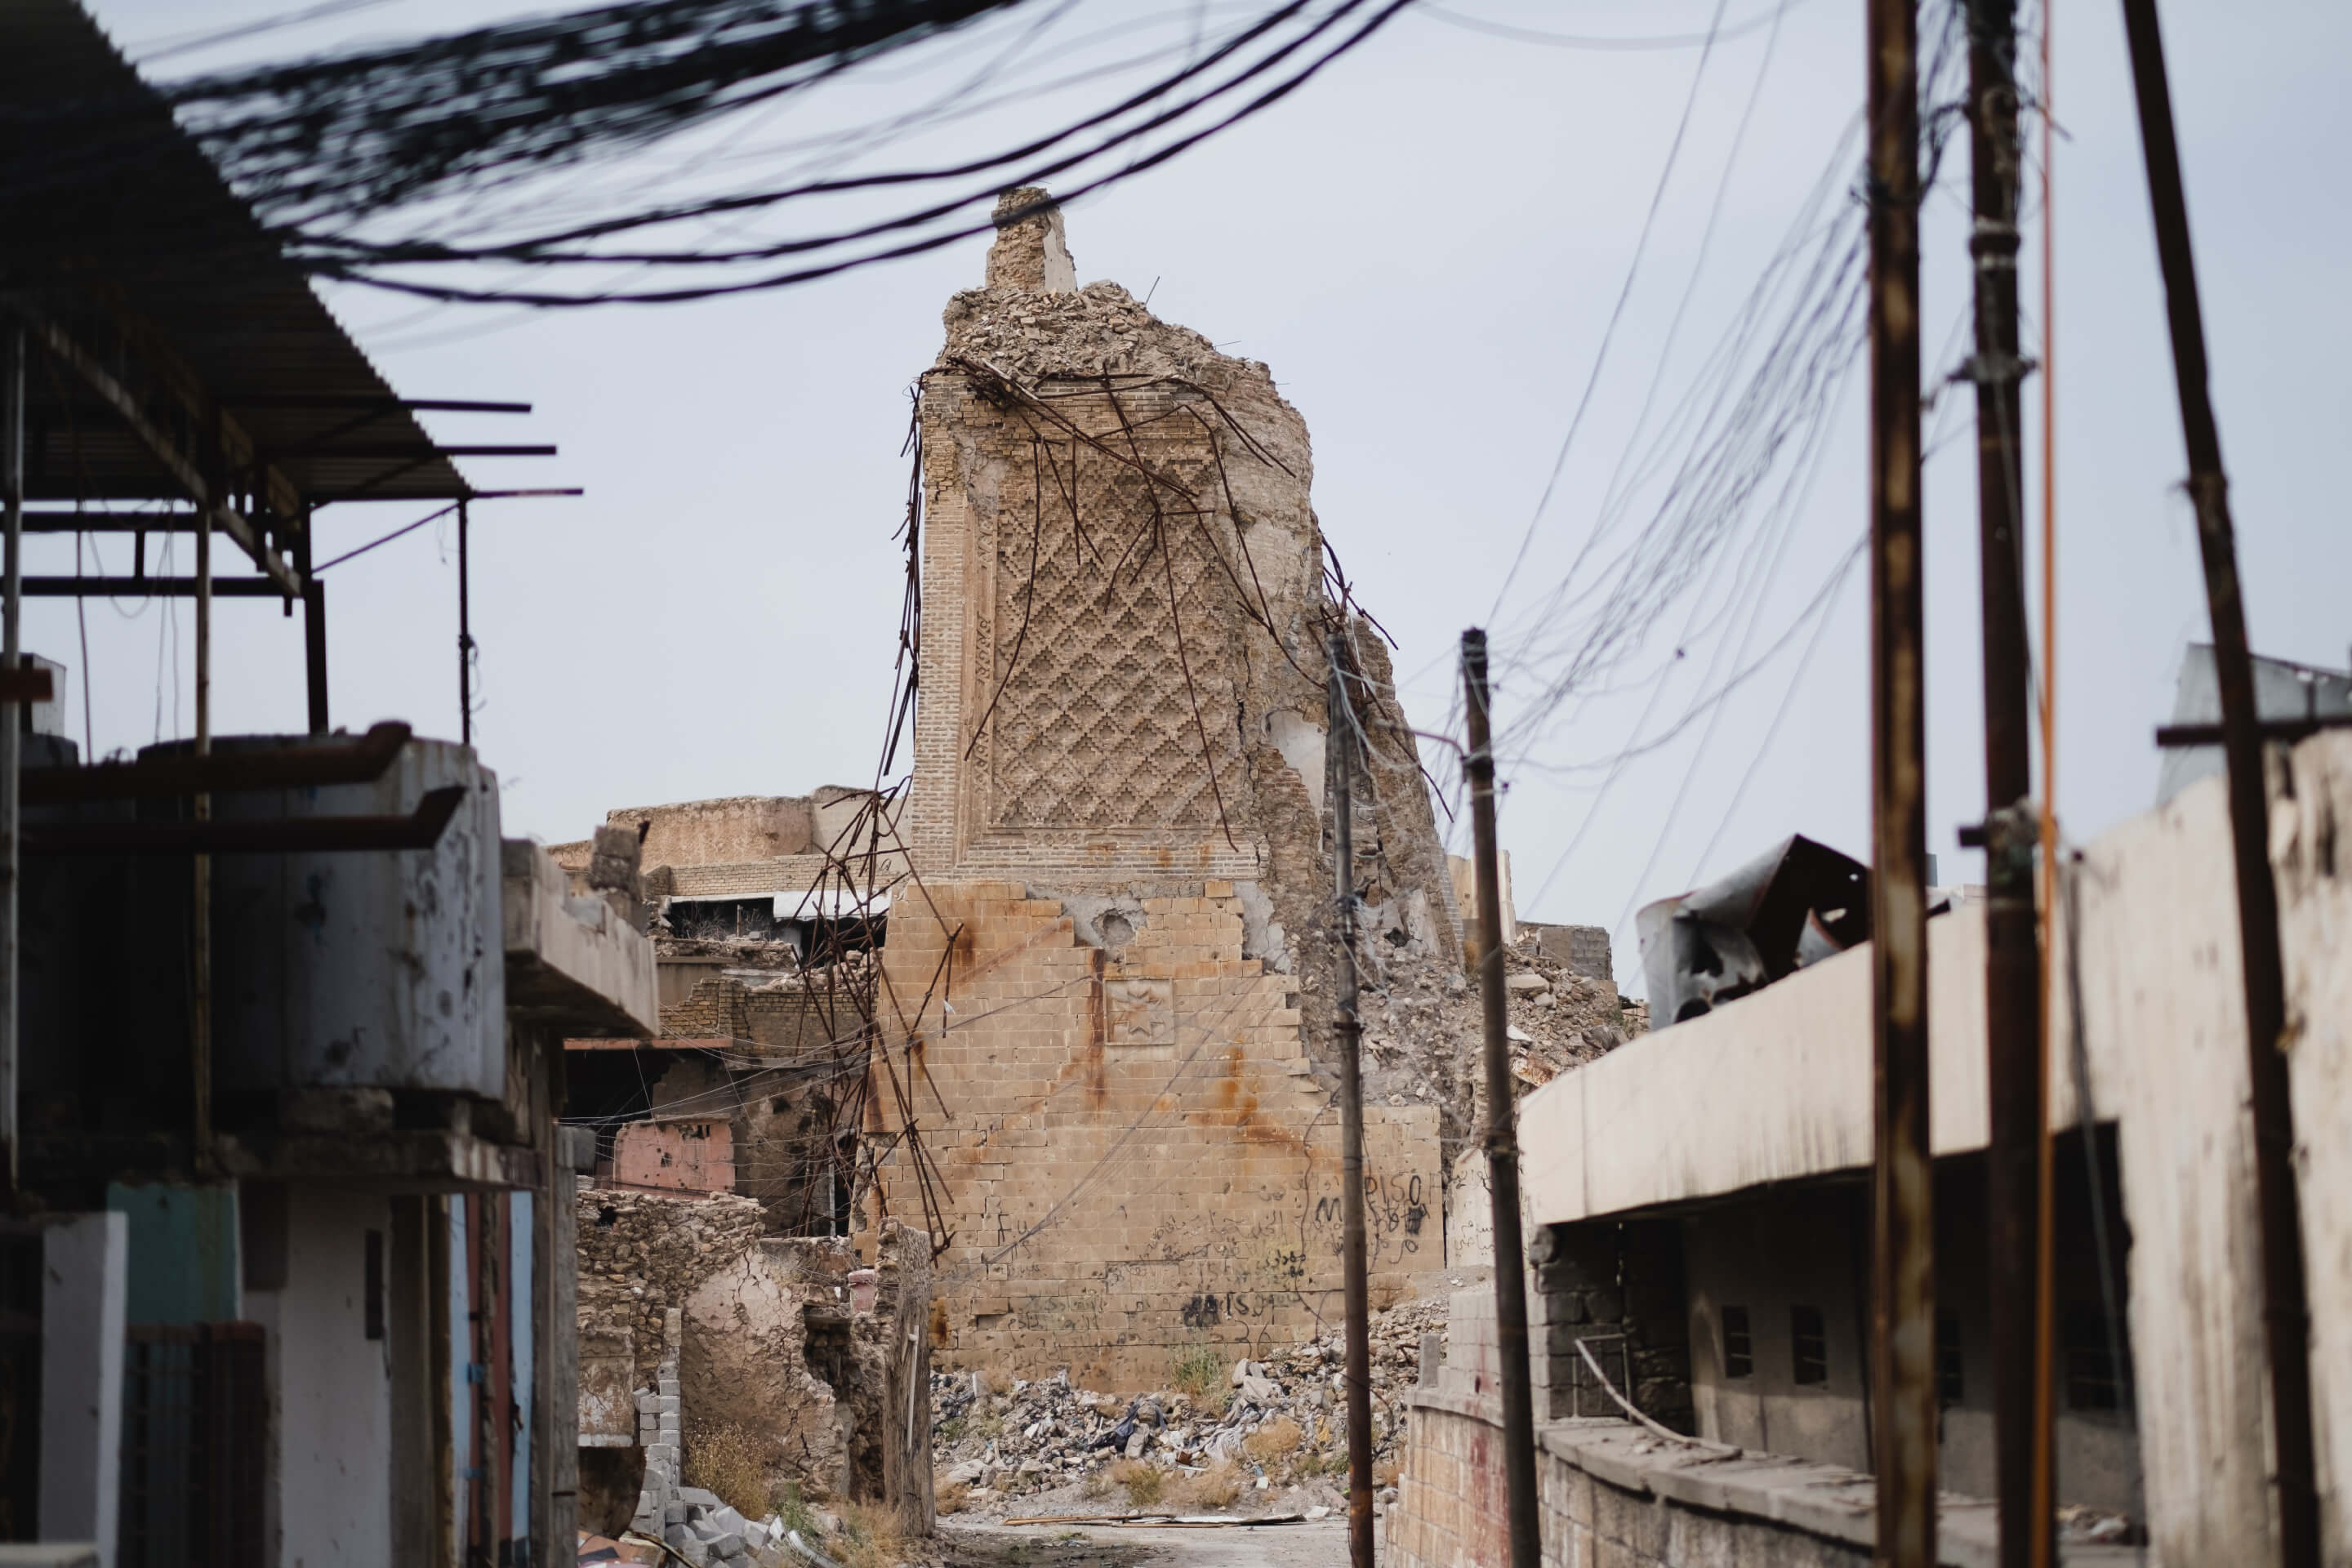 A ruined mosque crumbling amid power lines